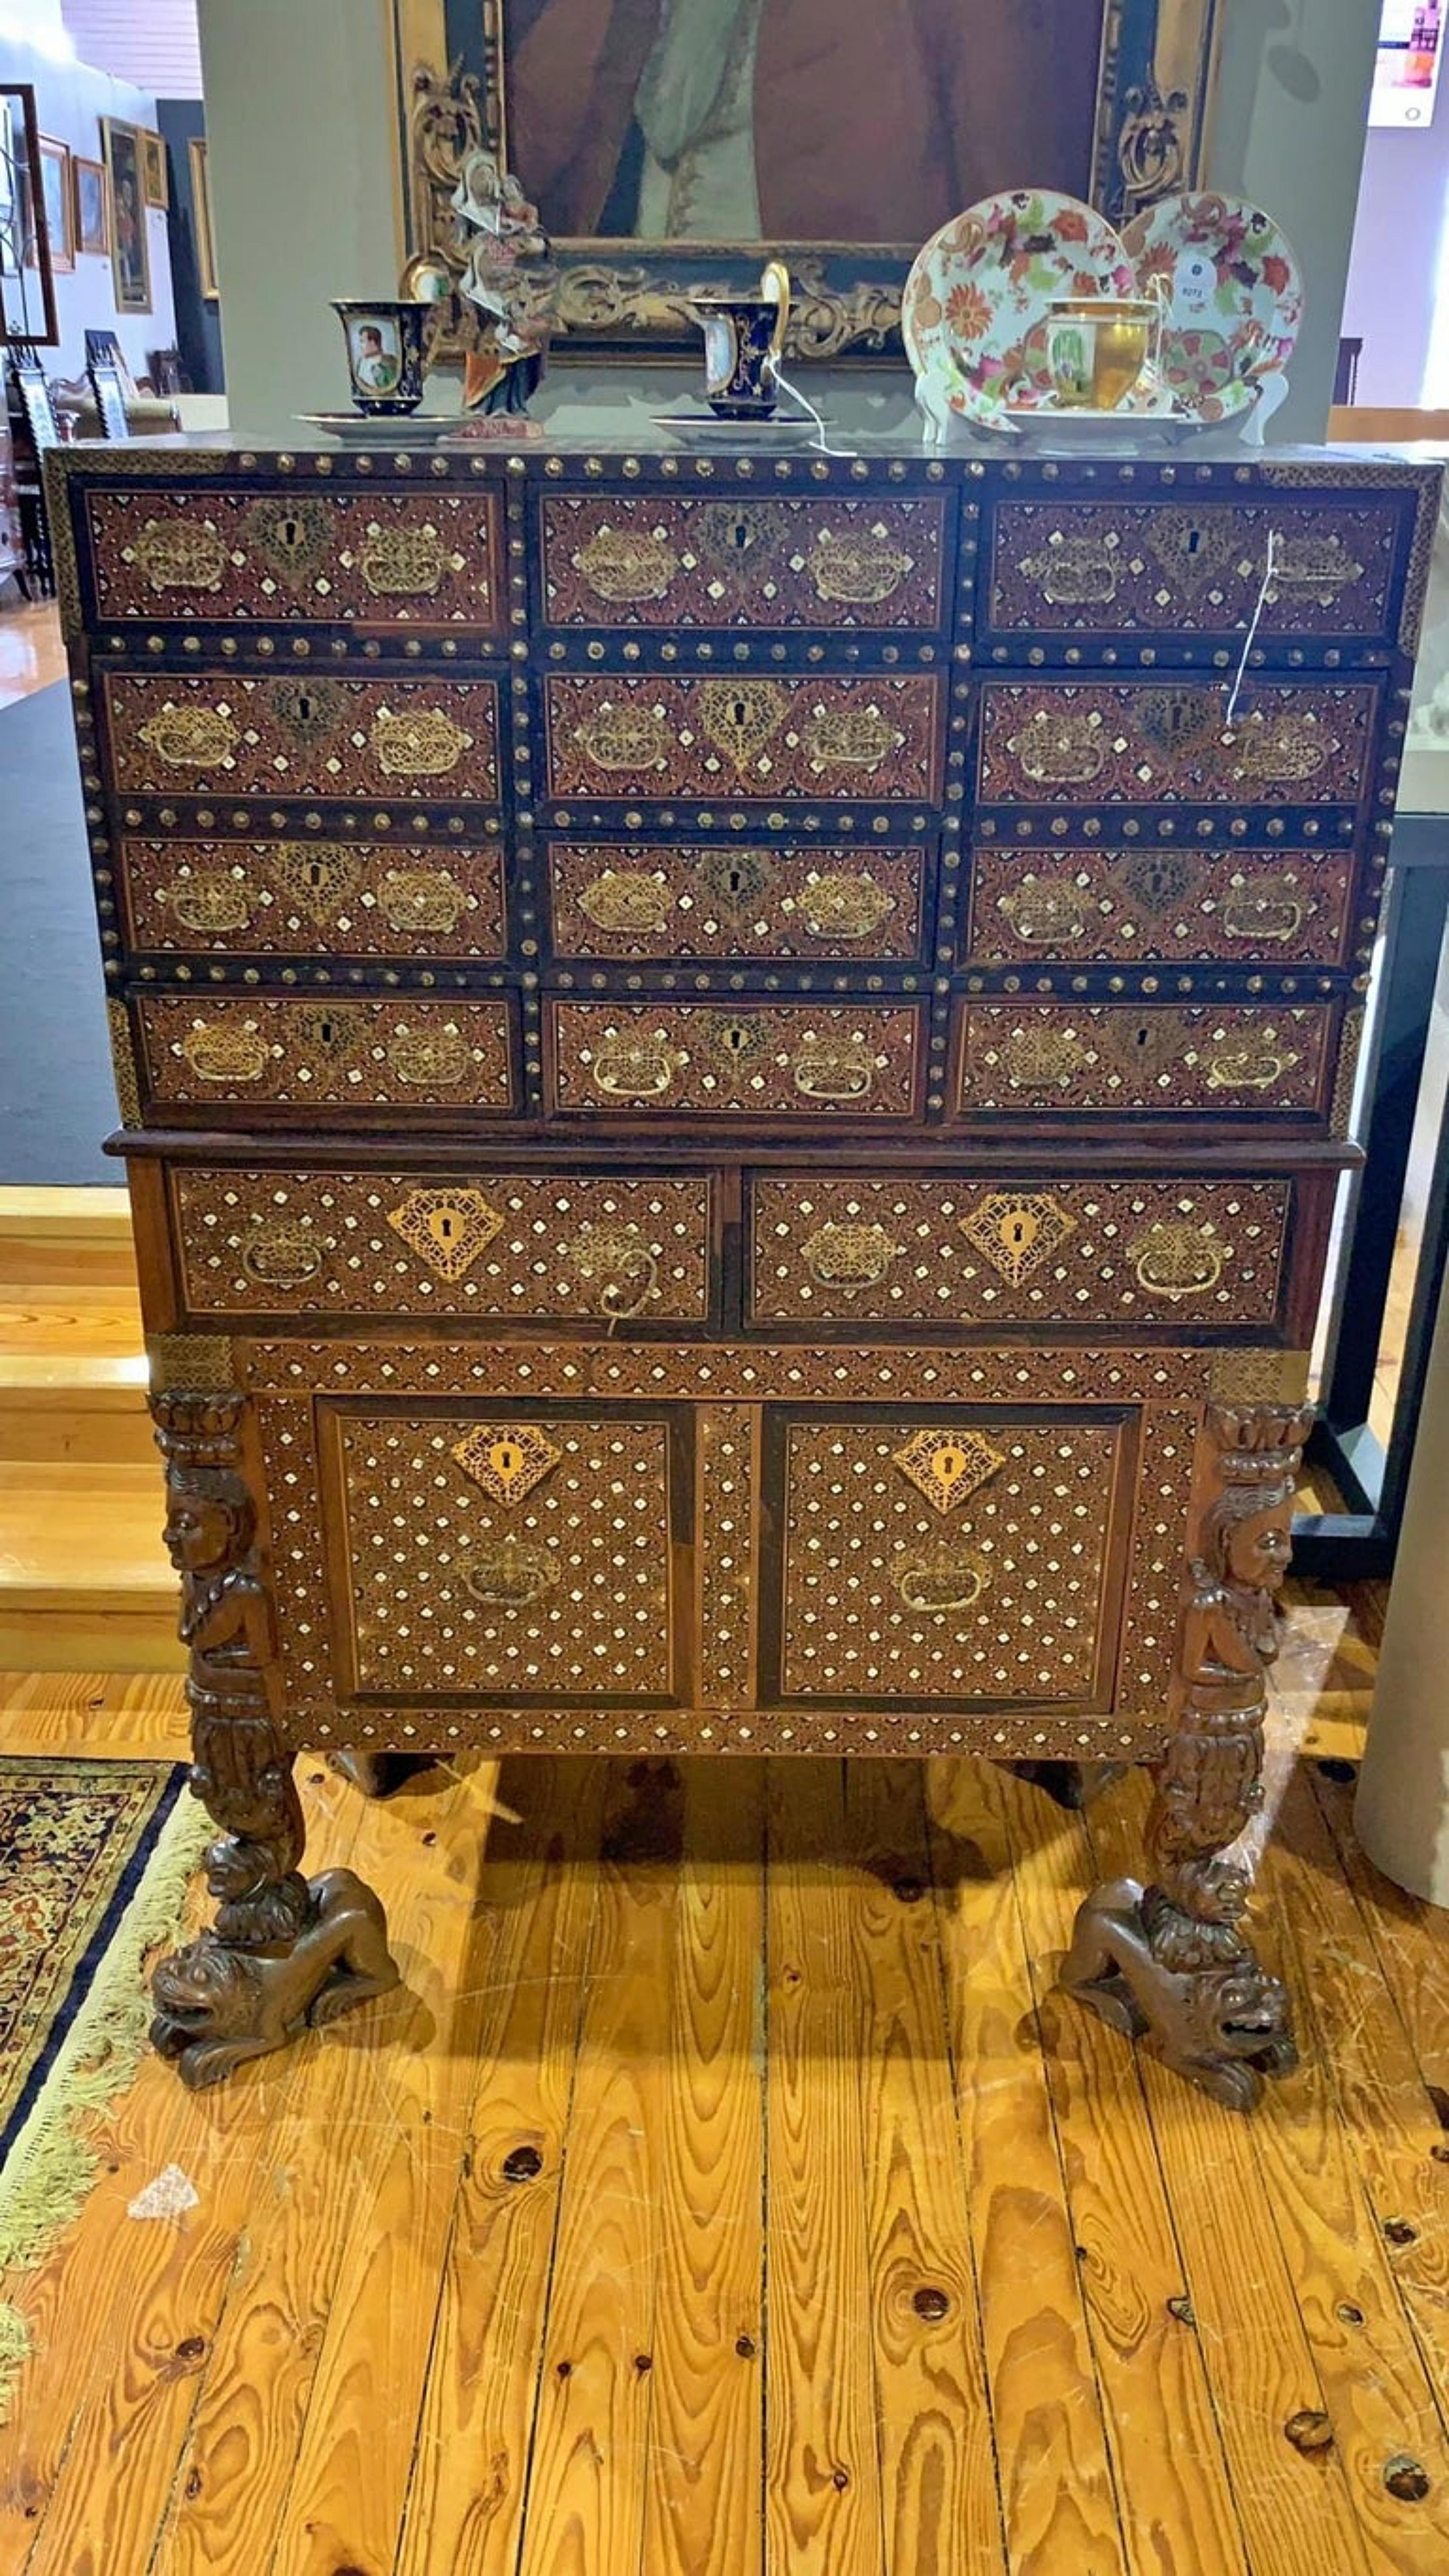 Important counter with trimpe

Indo-Portuguese 17th Century
of two bodies in ebony and sissoo.

Box with ten drawers simulating twelve drawers, resting on a base with two drawers and a large drawer supported by legs in the form of female figures,